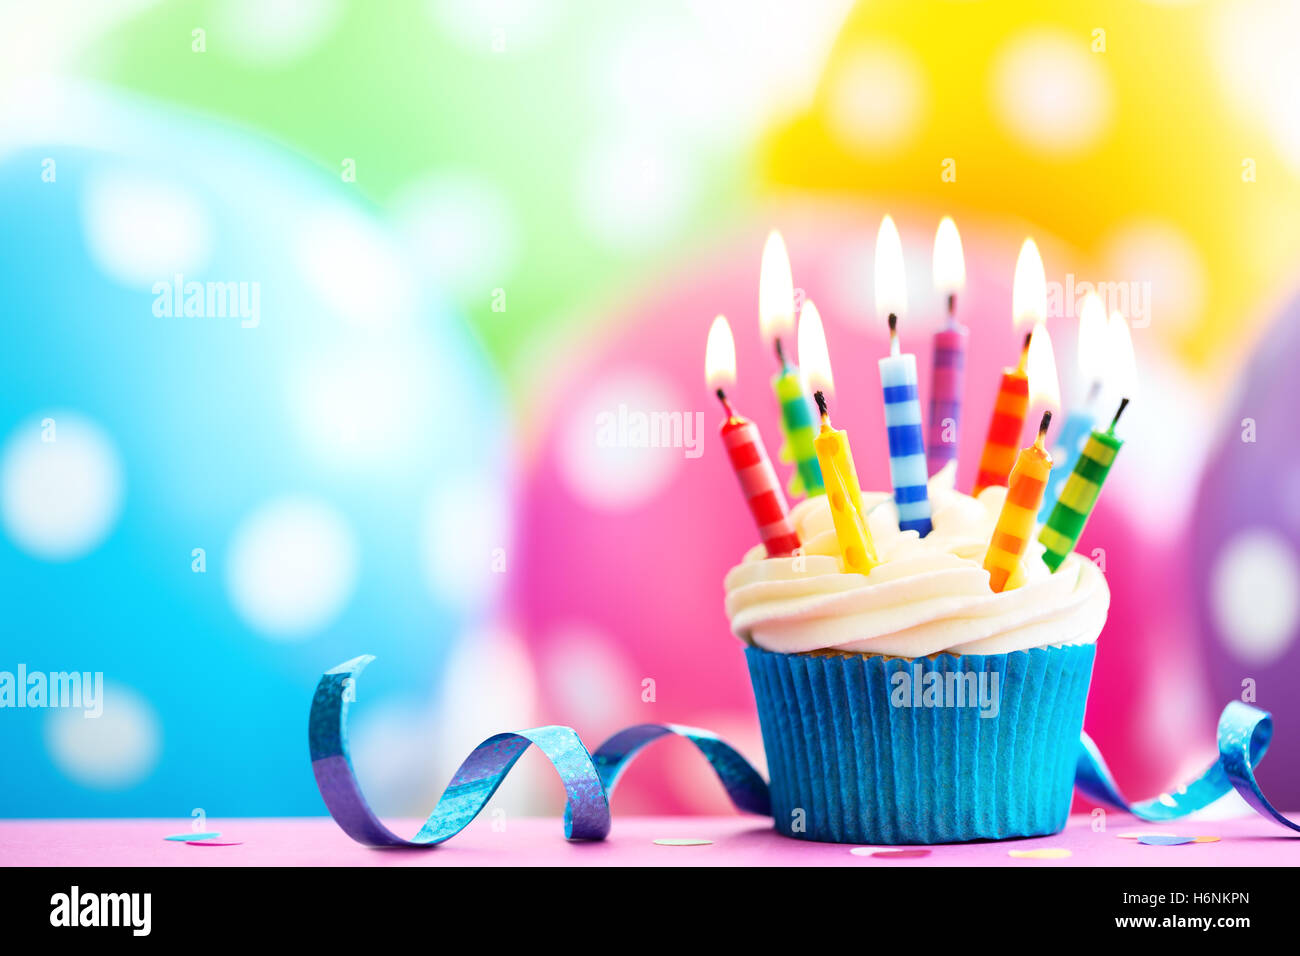 Cupcake decorated with colorful birthday candles Stock Photo